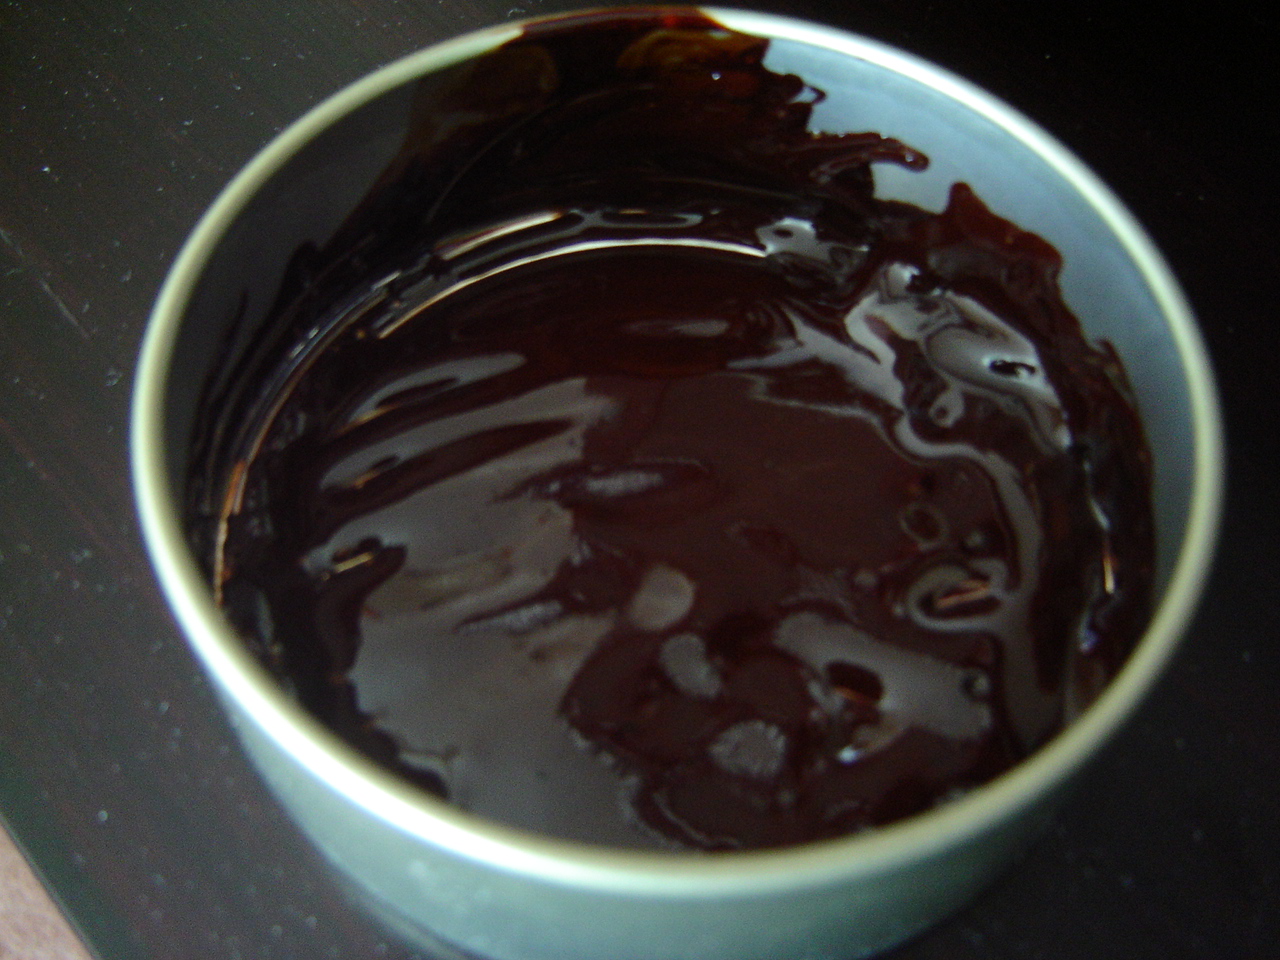 https://upload.wikimedia.org/wikipedia/commons/7/78/Lacquer_in_liquid_form%2C_mixed_with_water_and_turpentine.jpg